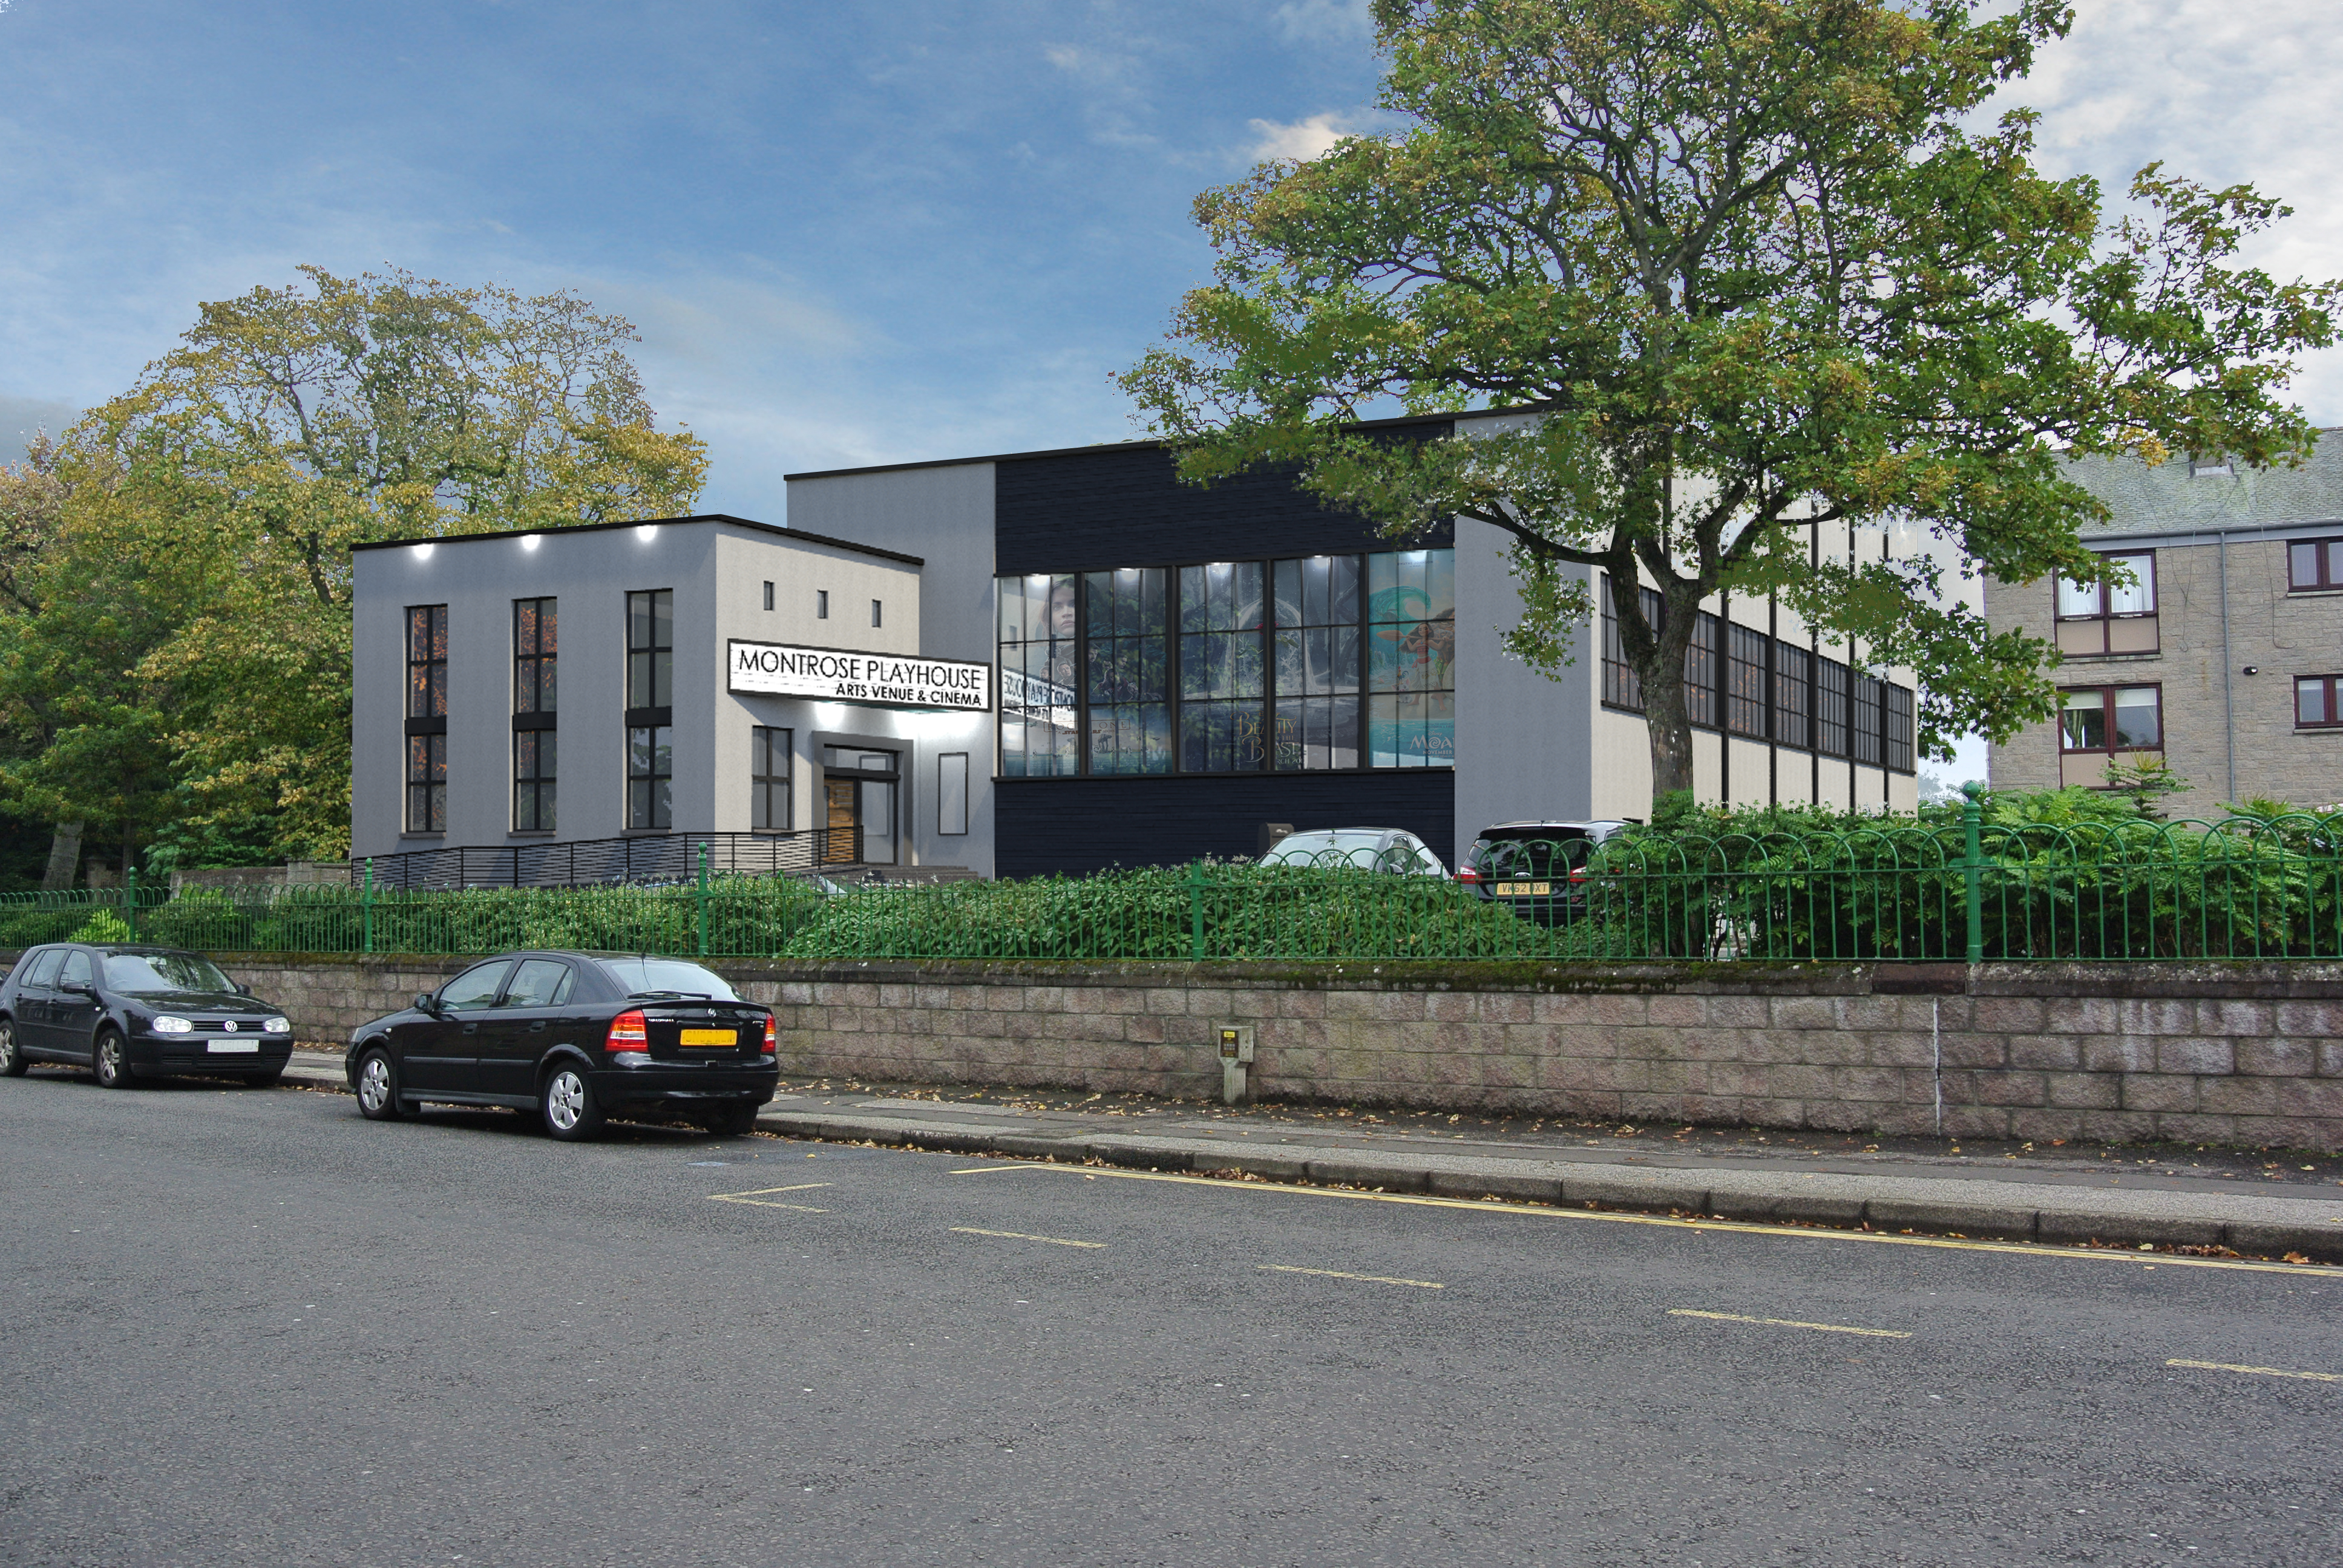 An artist's impression of the Montrose Playhouse plan.